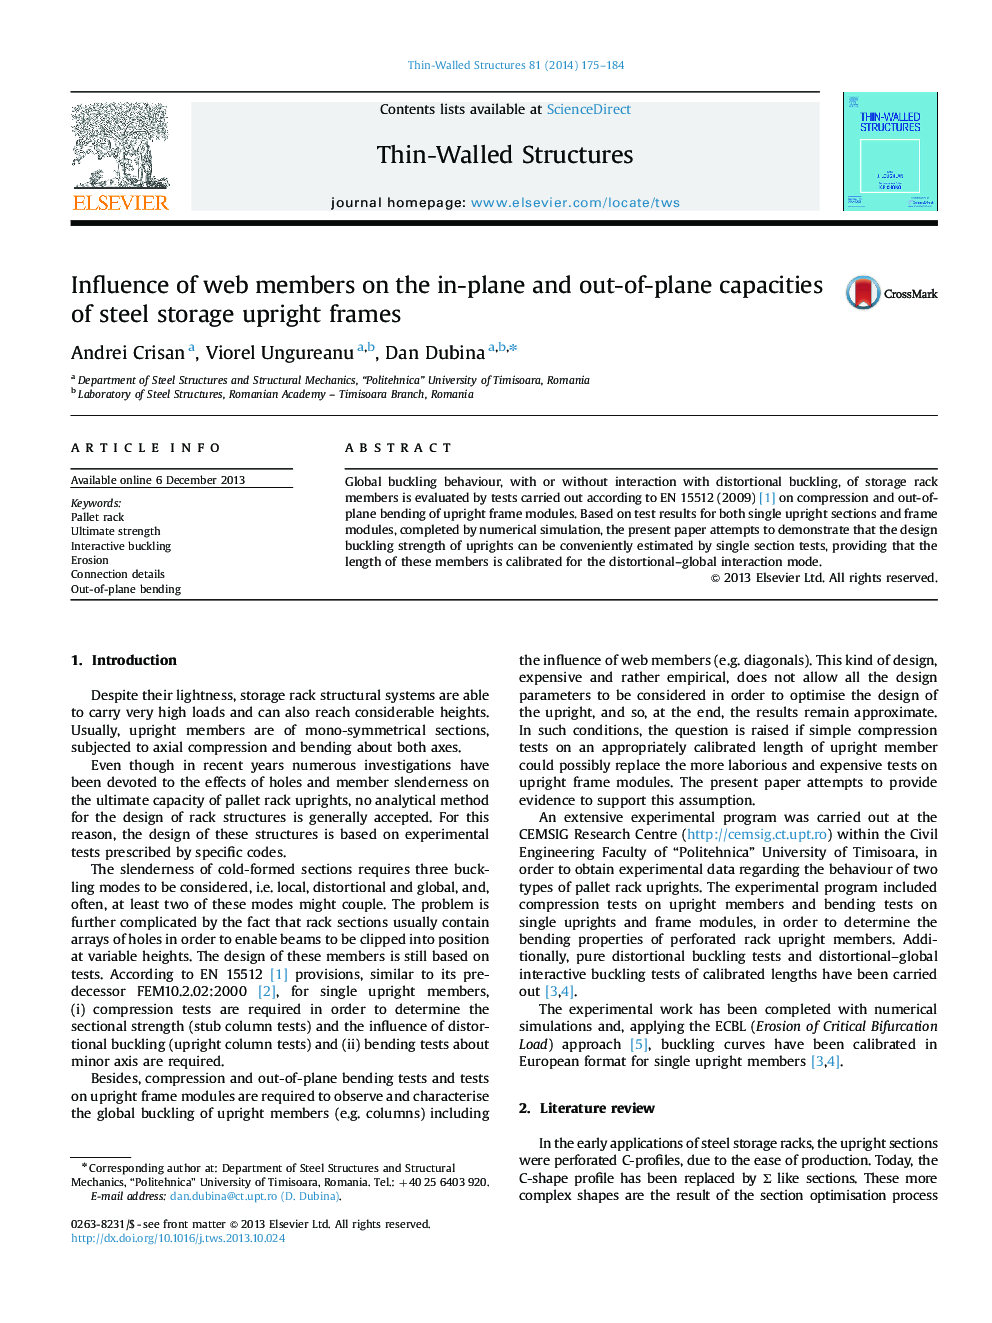 Influence of web members on the in-plane and out-of-plane capacities of steel storage upright frames